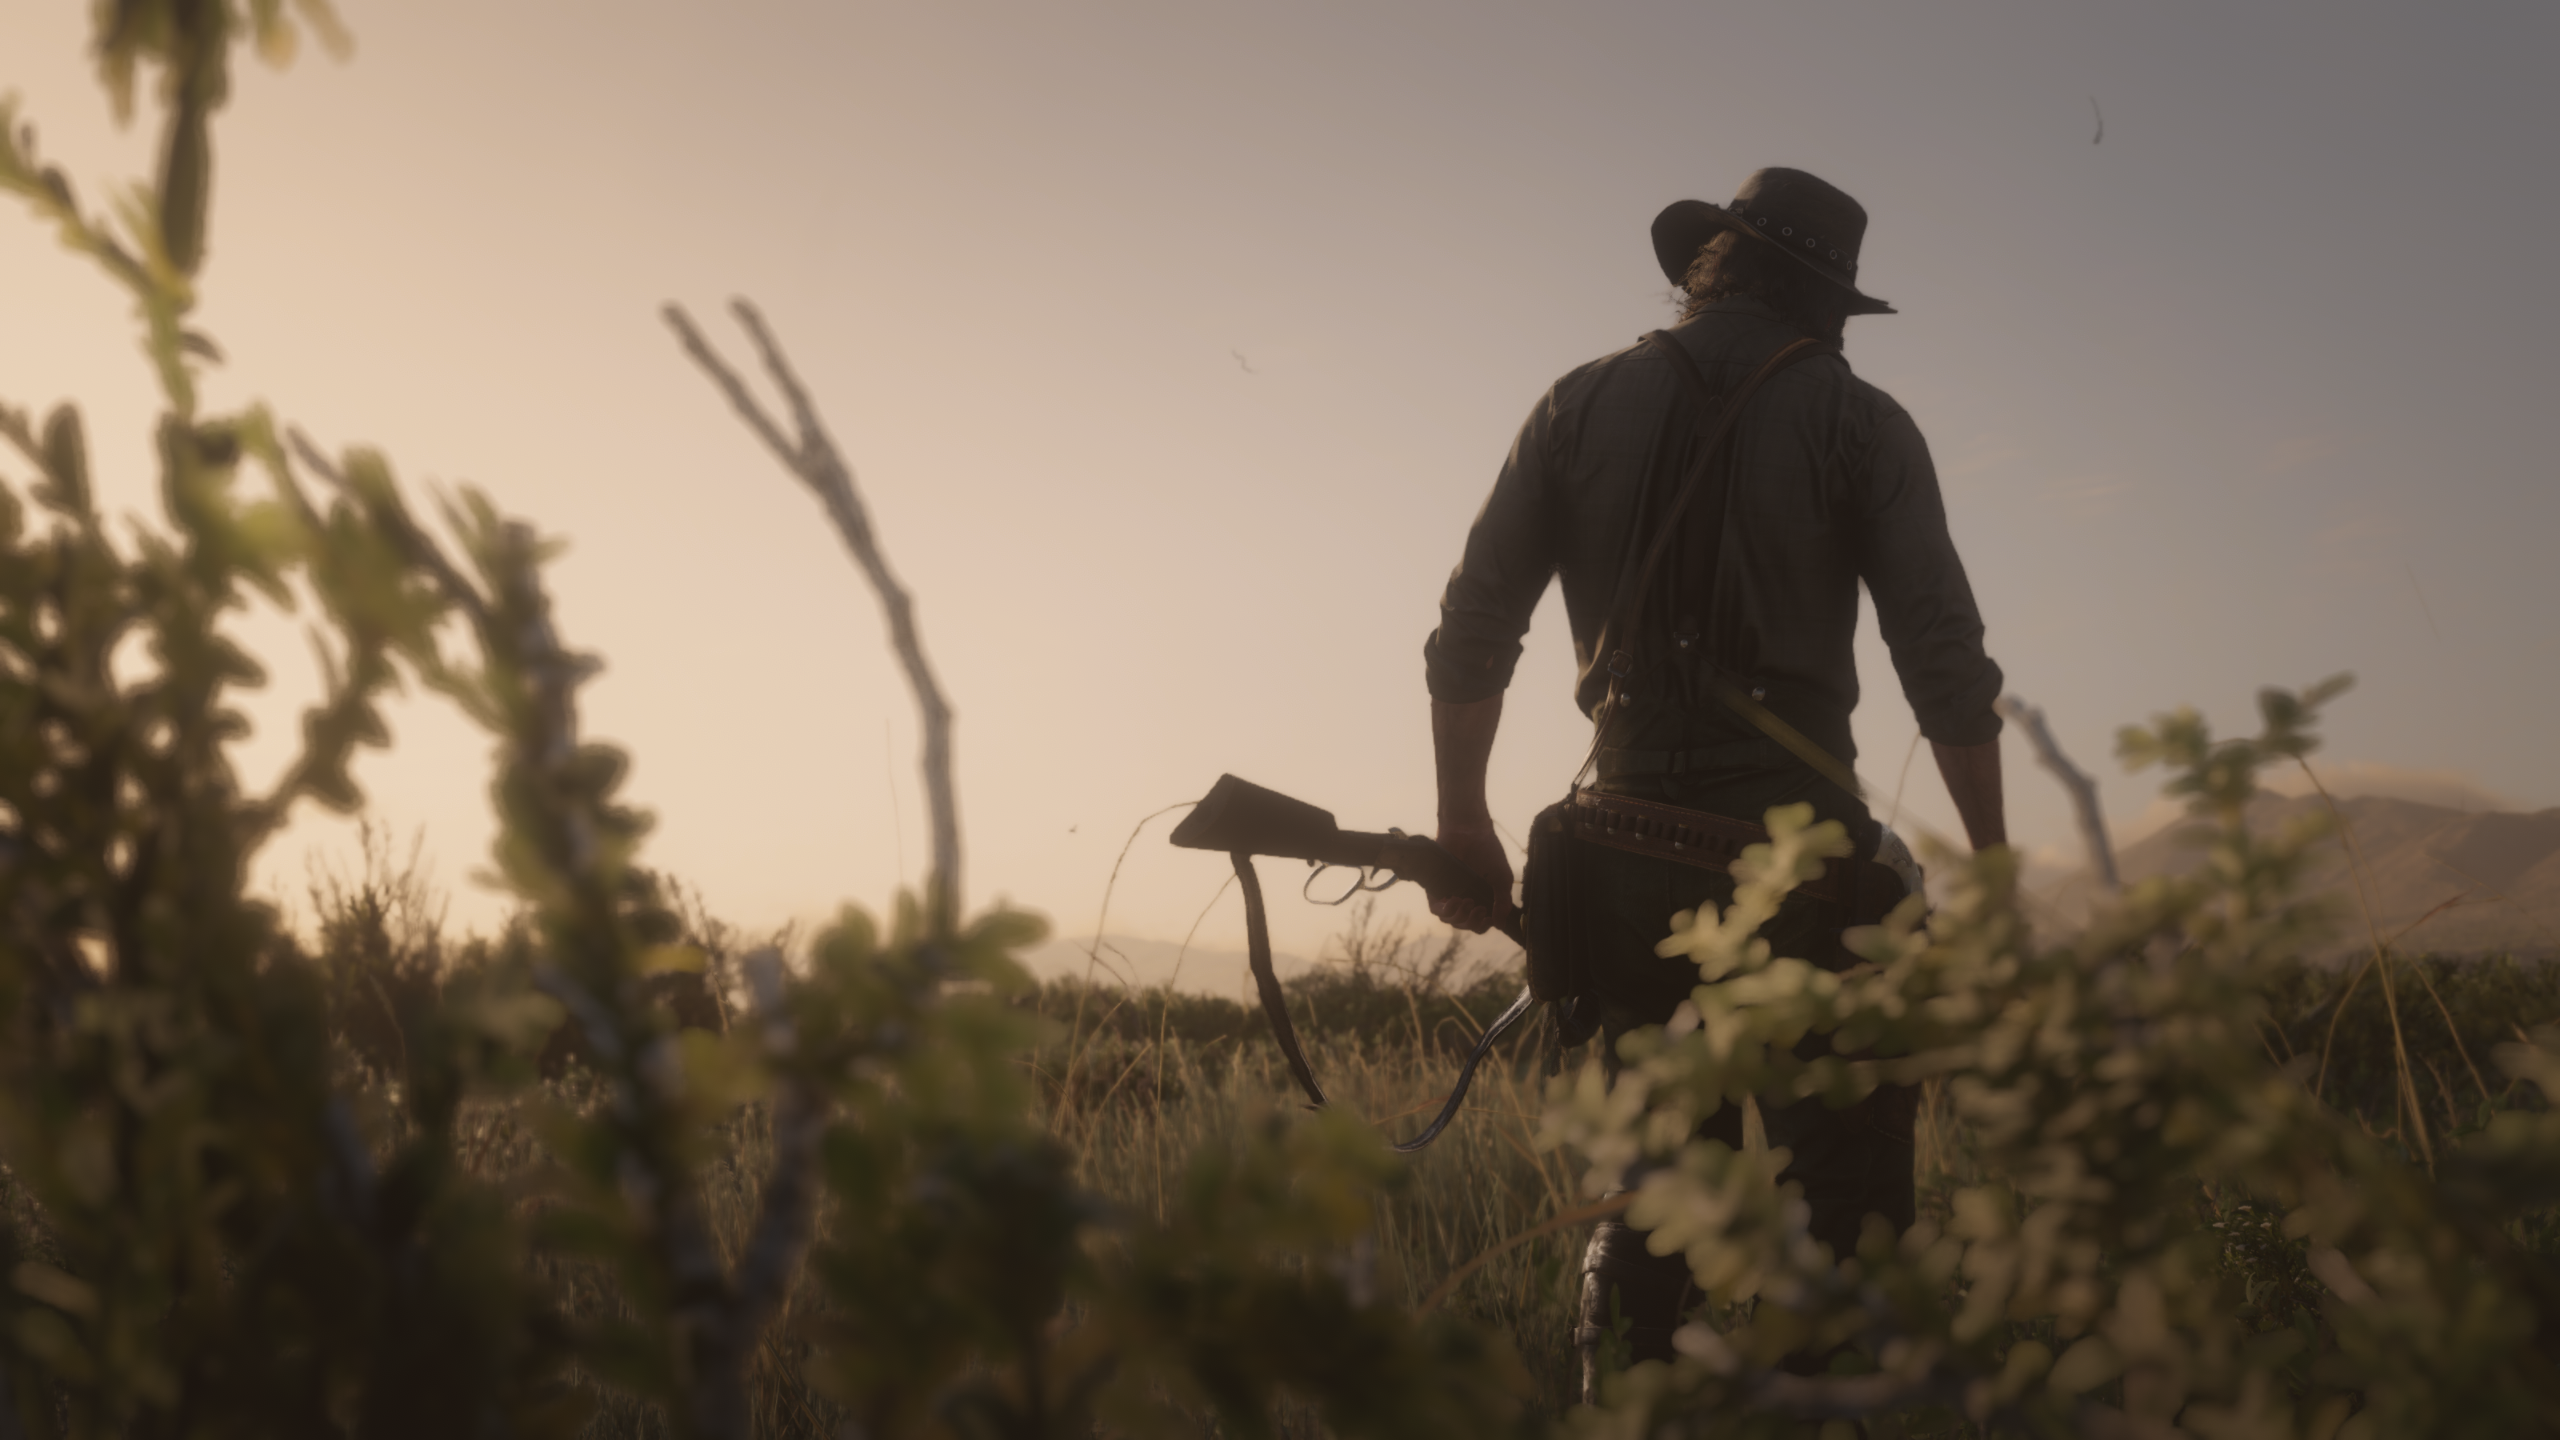 General 2560x1440 Red Dead Redemption 2 John Marston video game characters western weapon sunset nature